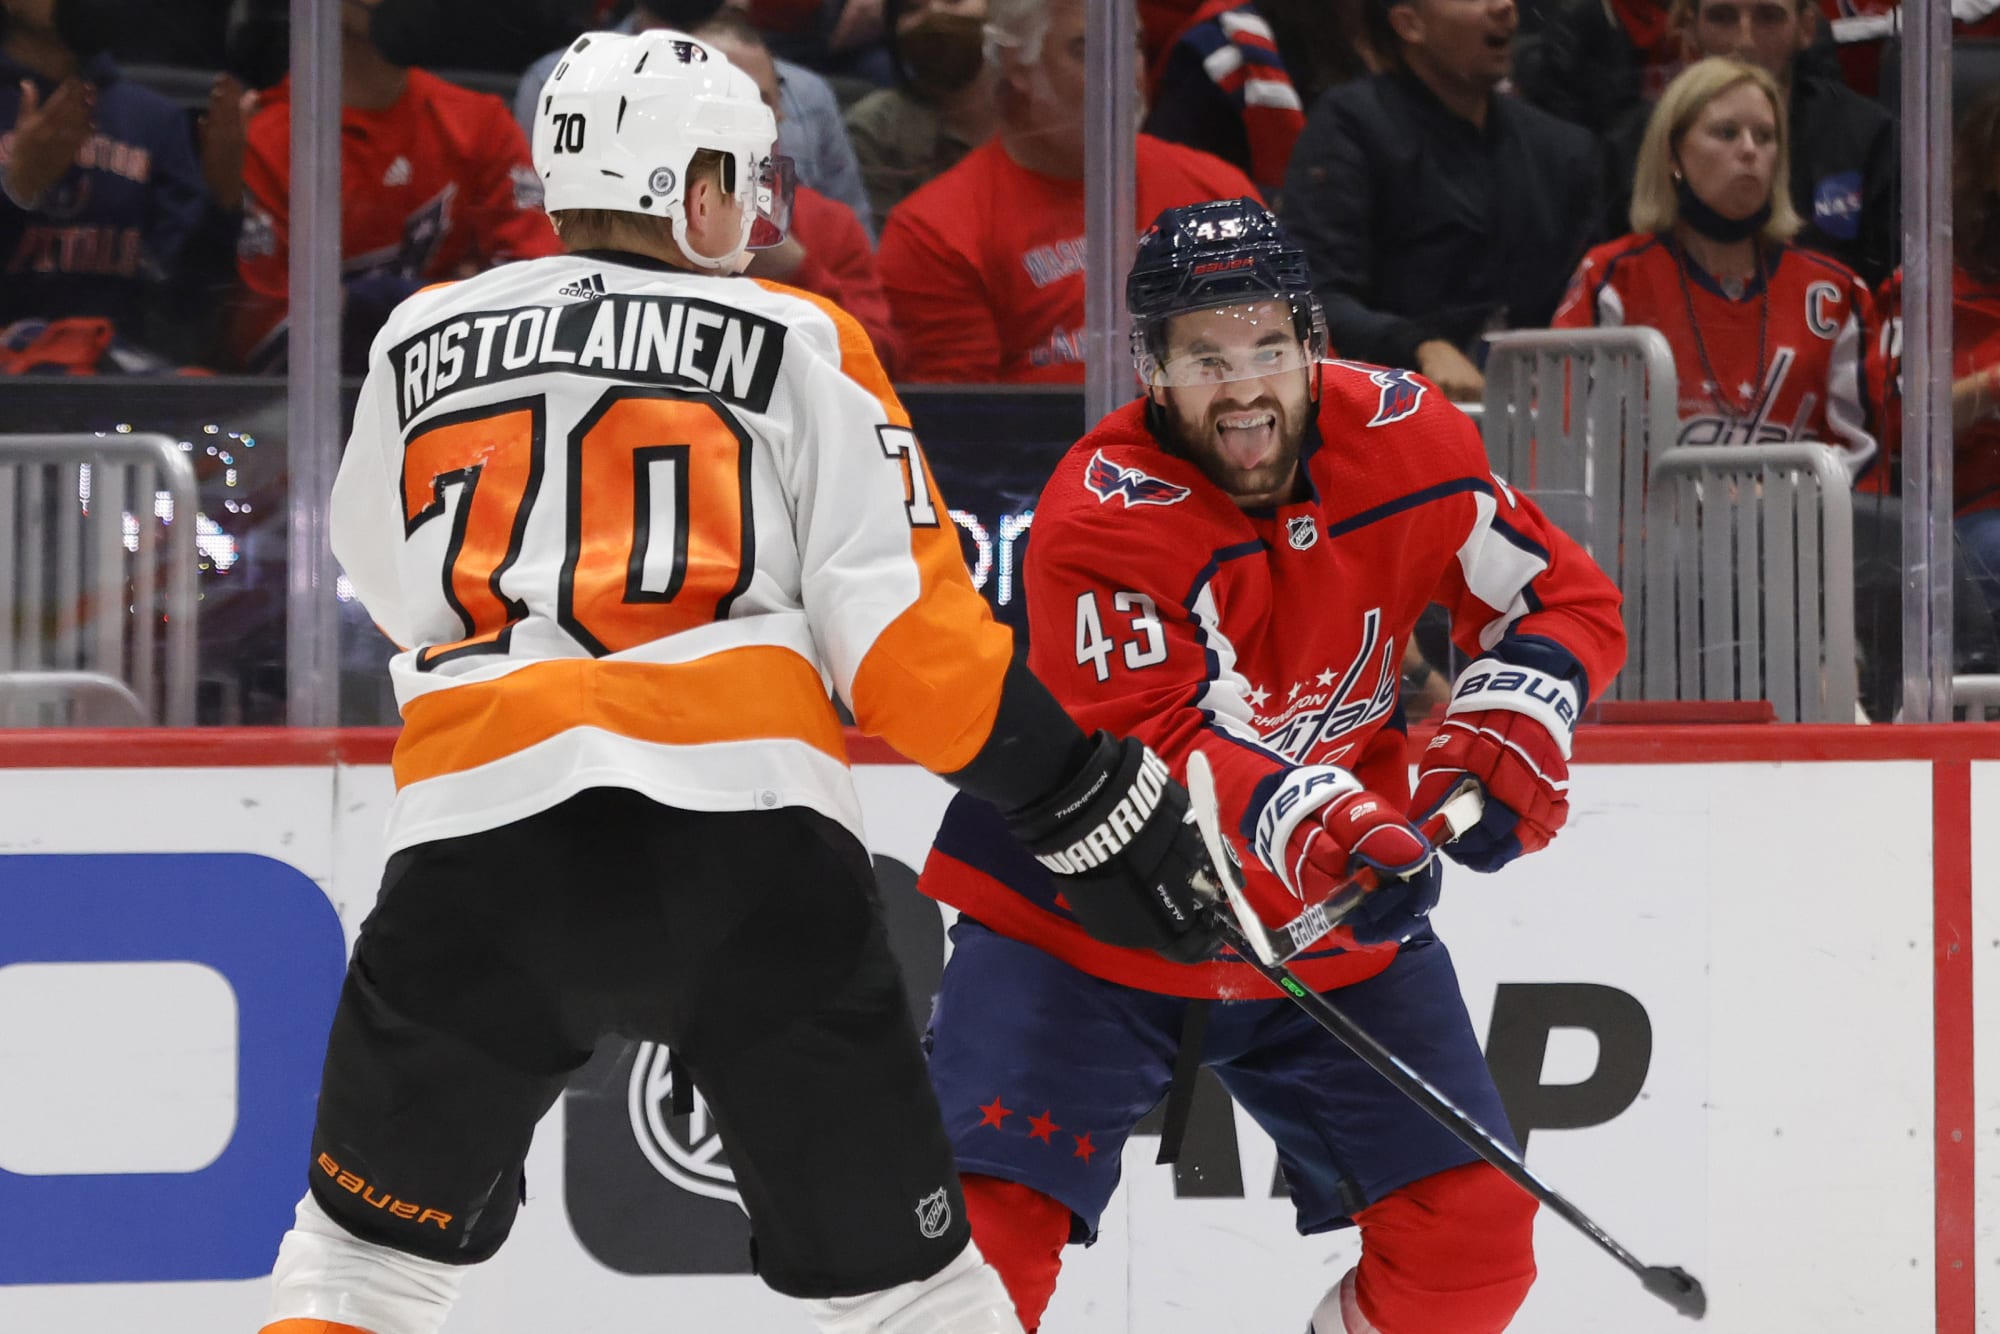 Flyers hitting the nation's capital for a date with Washington